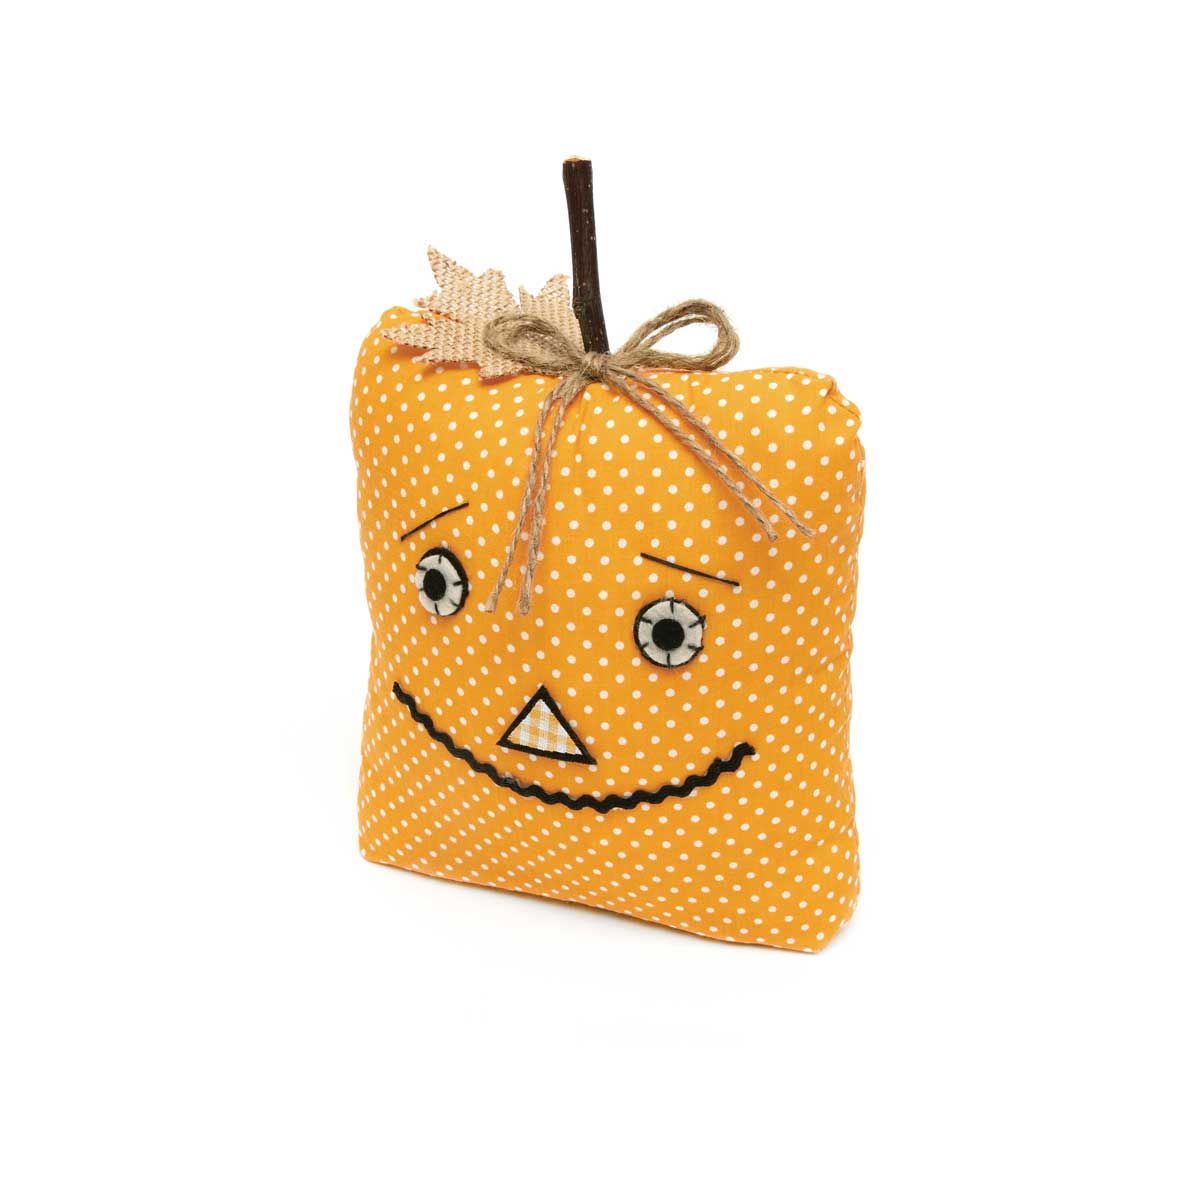 PILLOW PUMPKIN FACE SQUARE 7IN X 3.5IN X 7IN MUSTARD/WHITE